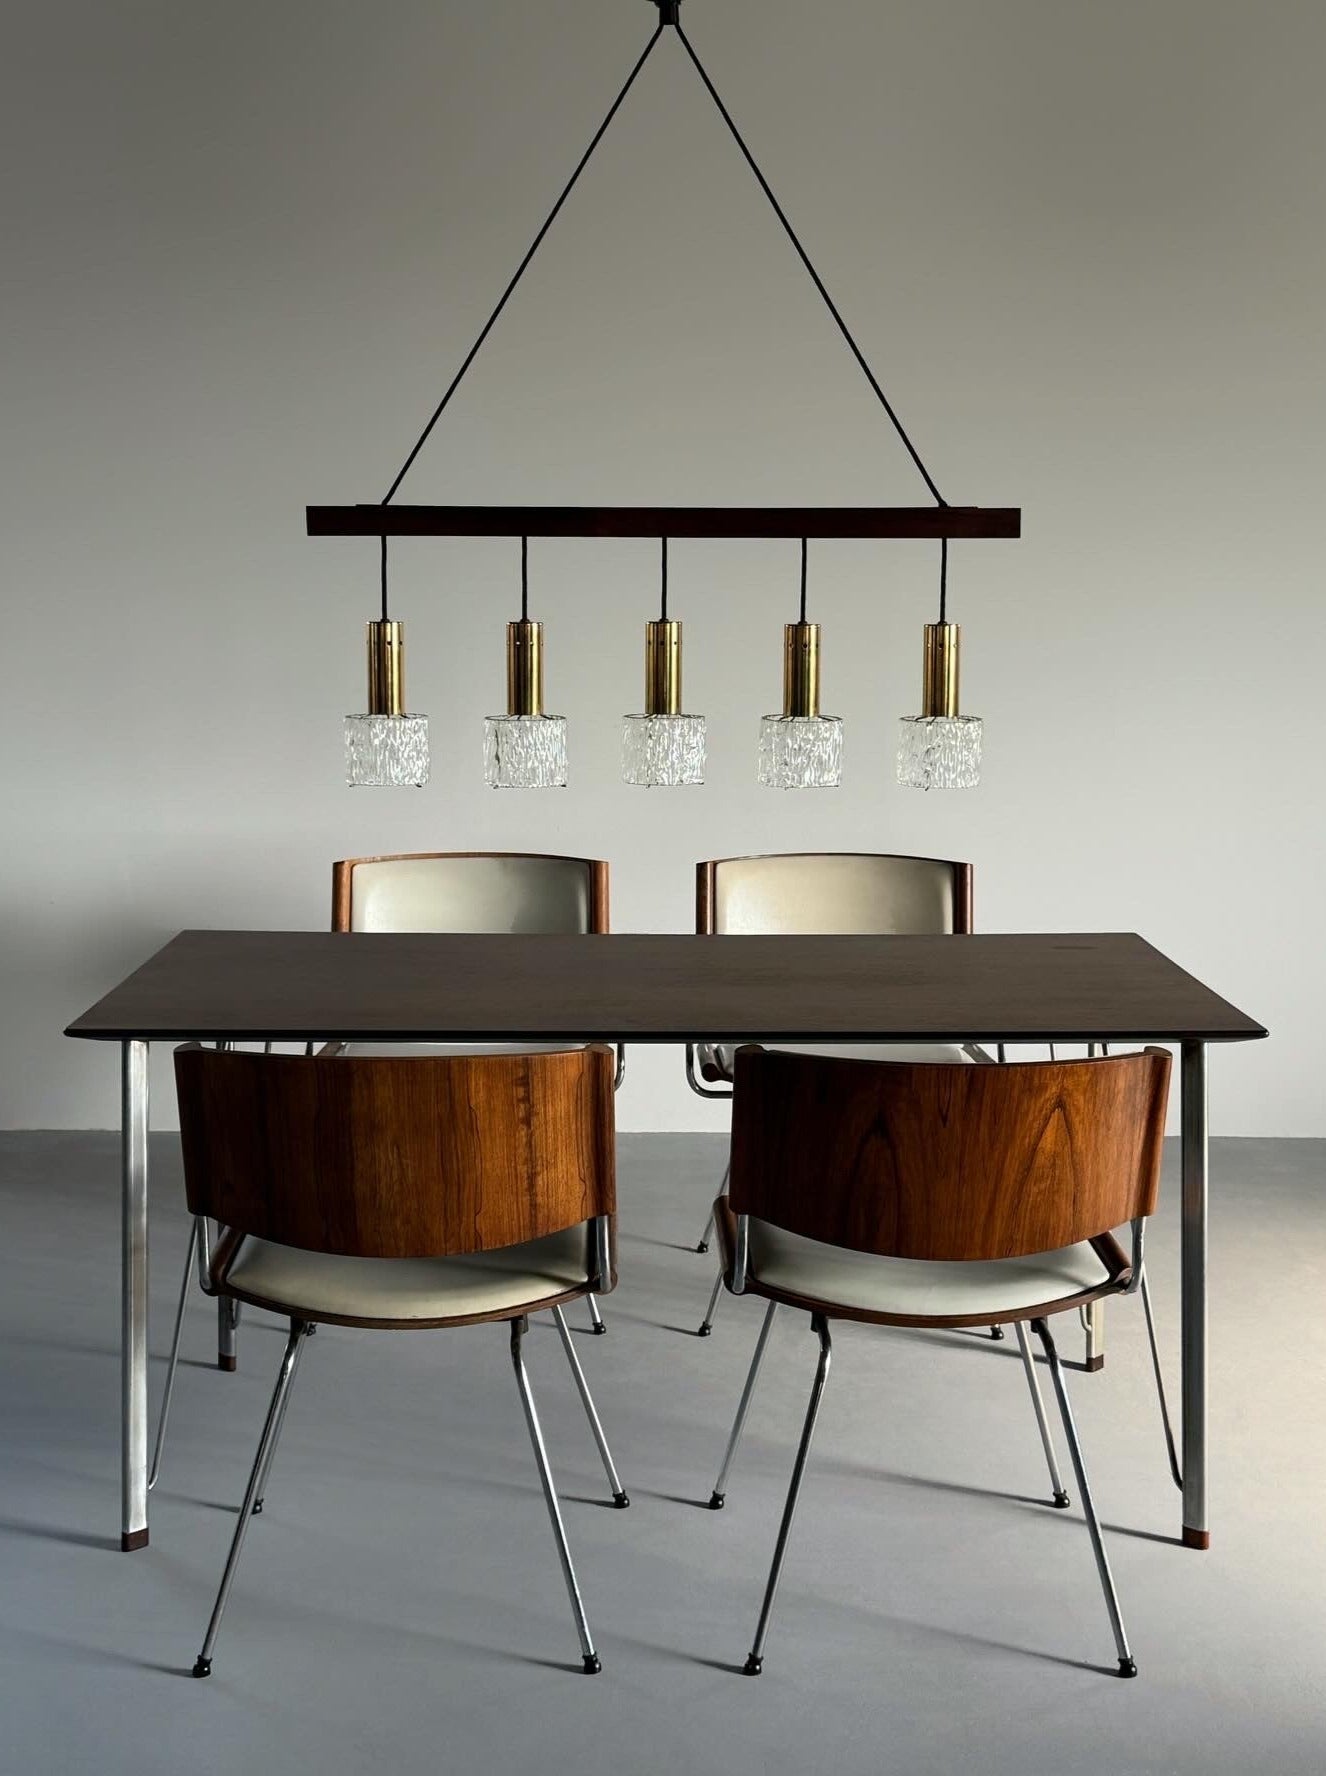 Model 3605 dining table / work table in rosewood by Arne Jacobsen